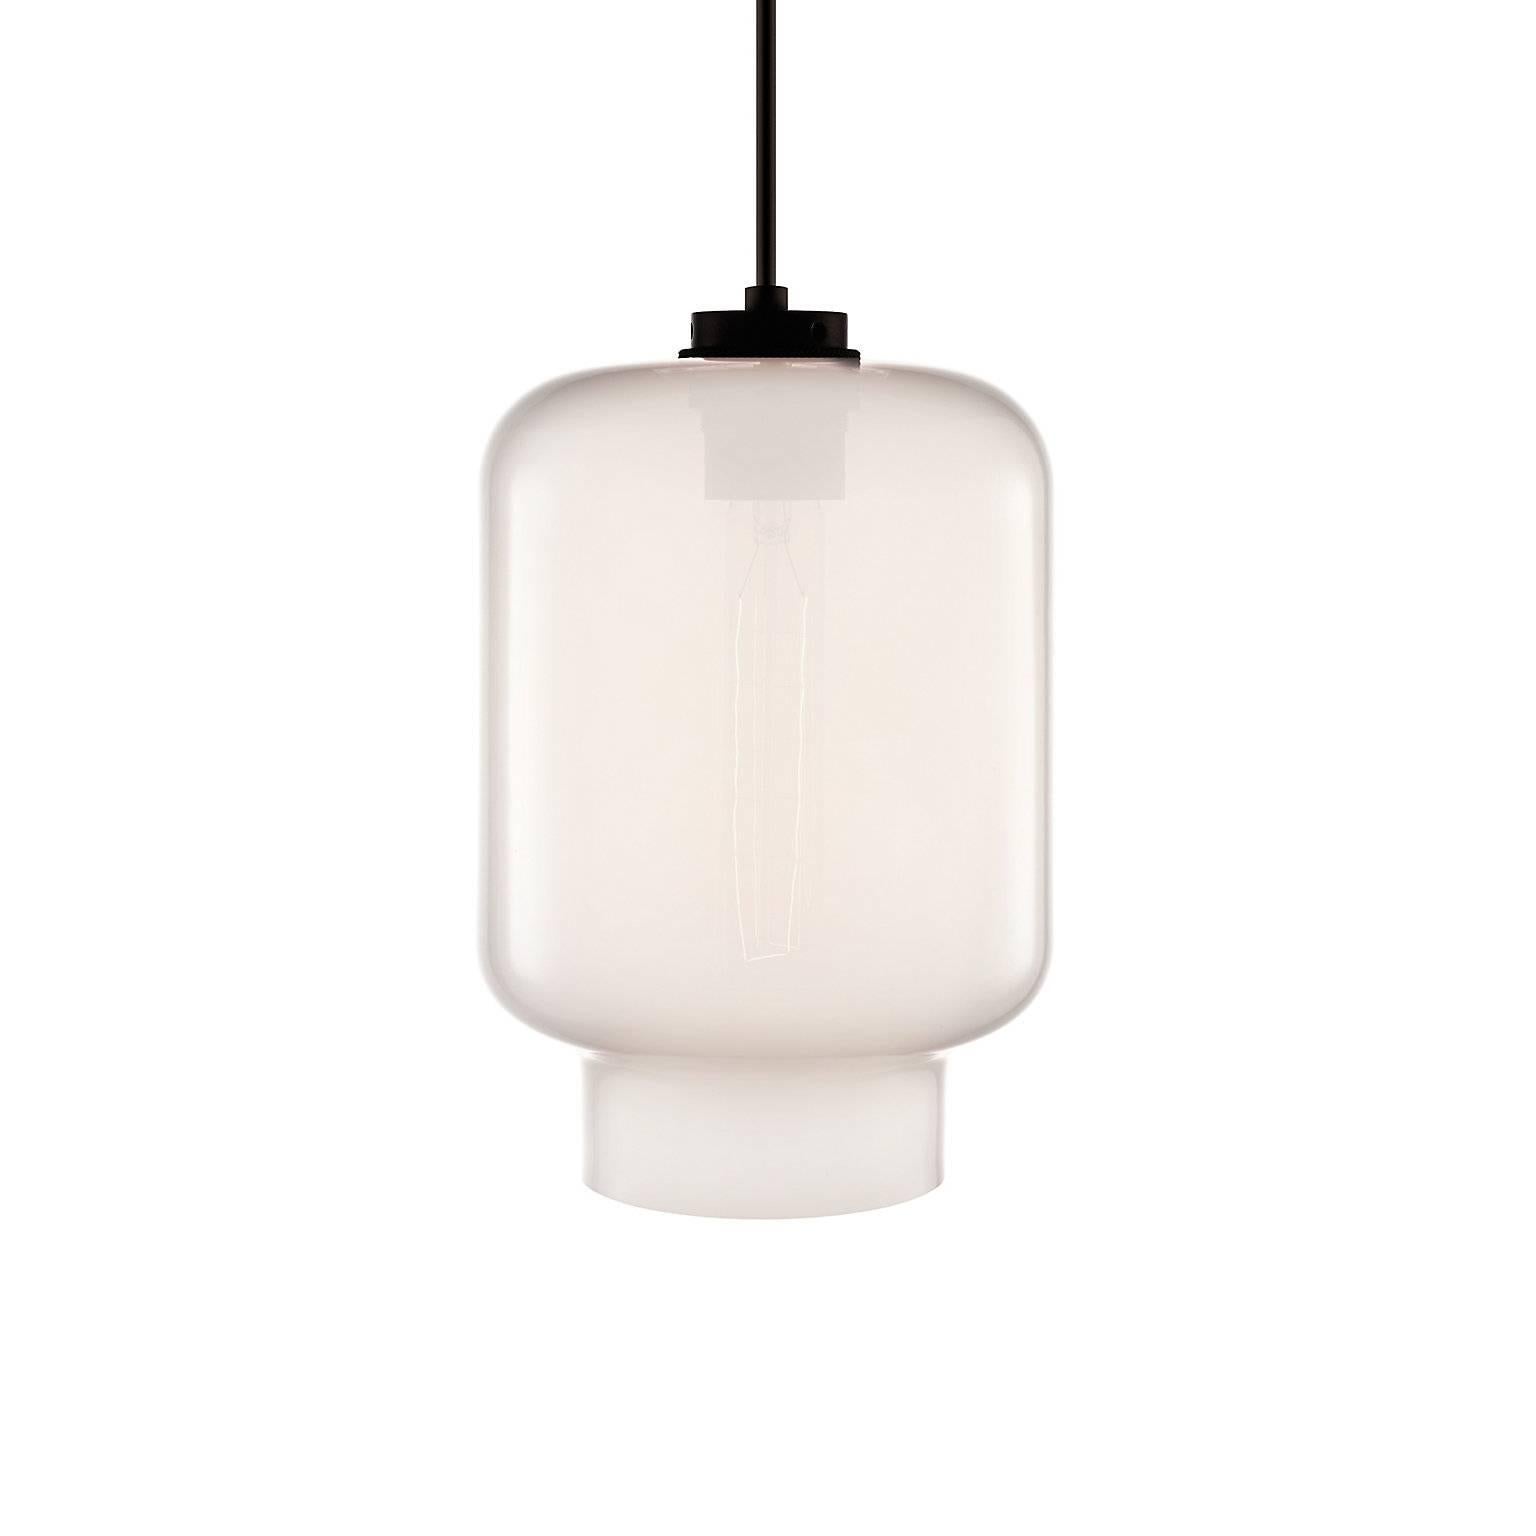 Unique to the Crystalline Series, the Calla pendant adds a softness to the grouping with its delicate frame. Pairs easily with the Delinea, Axia, and Trove pendants that also comprise the Crystalline Series. Every single glass pendant light that